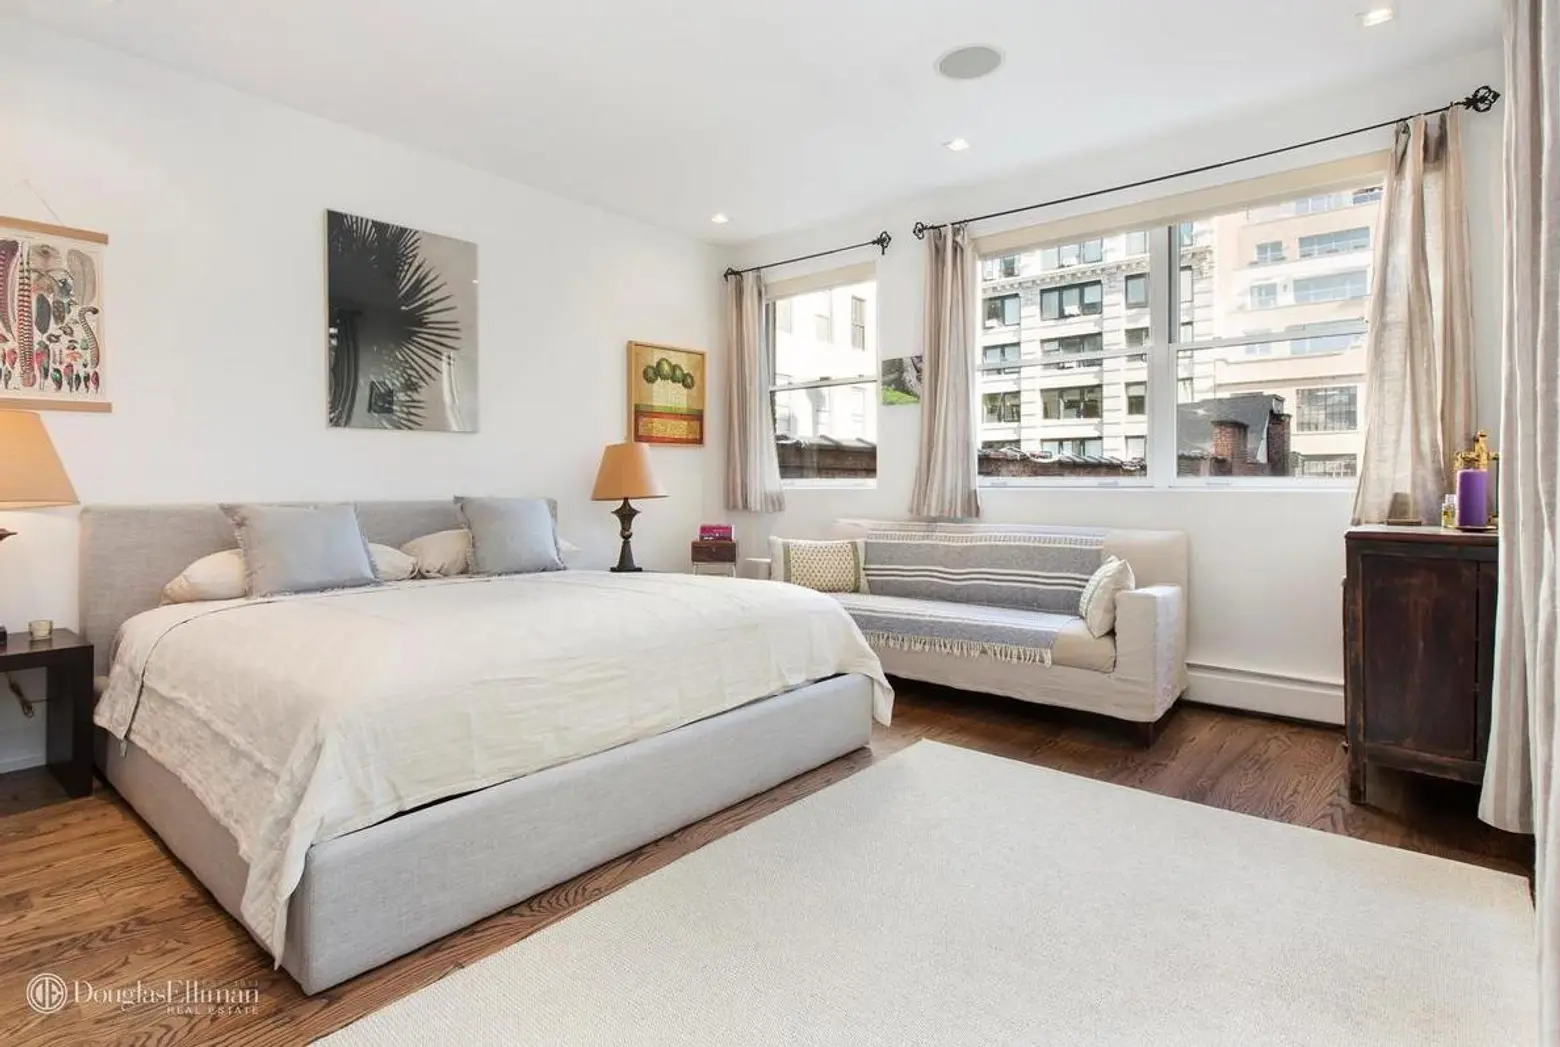 29 West 19th Street, Chelsea, Penthouses, outdoor spaces